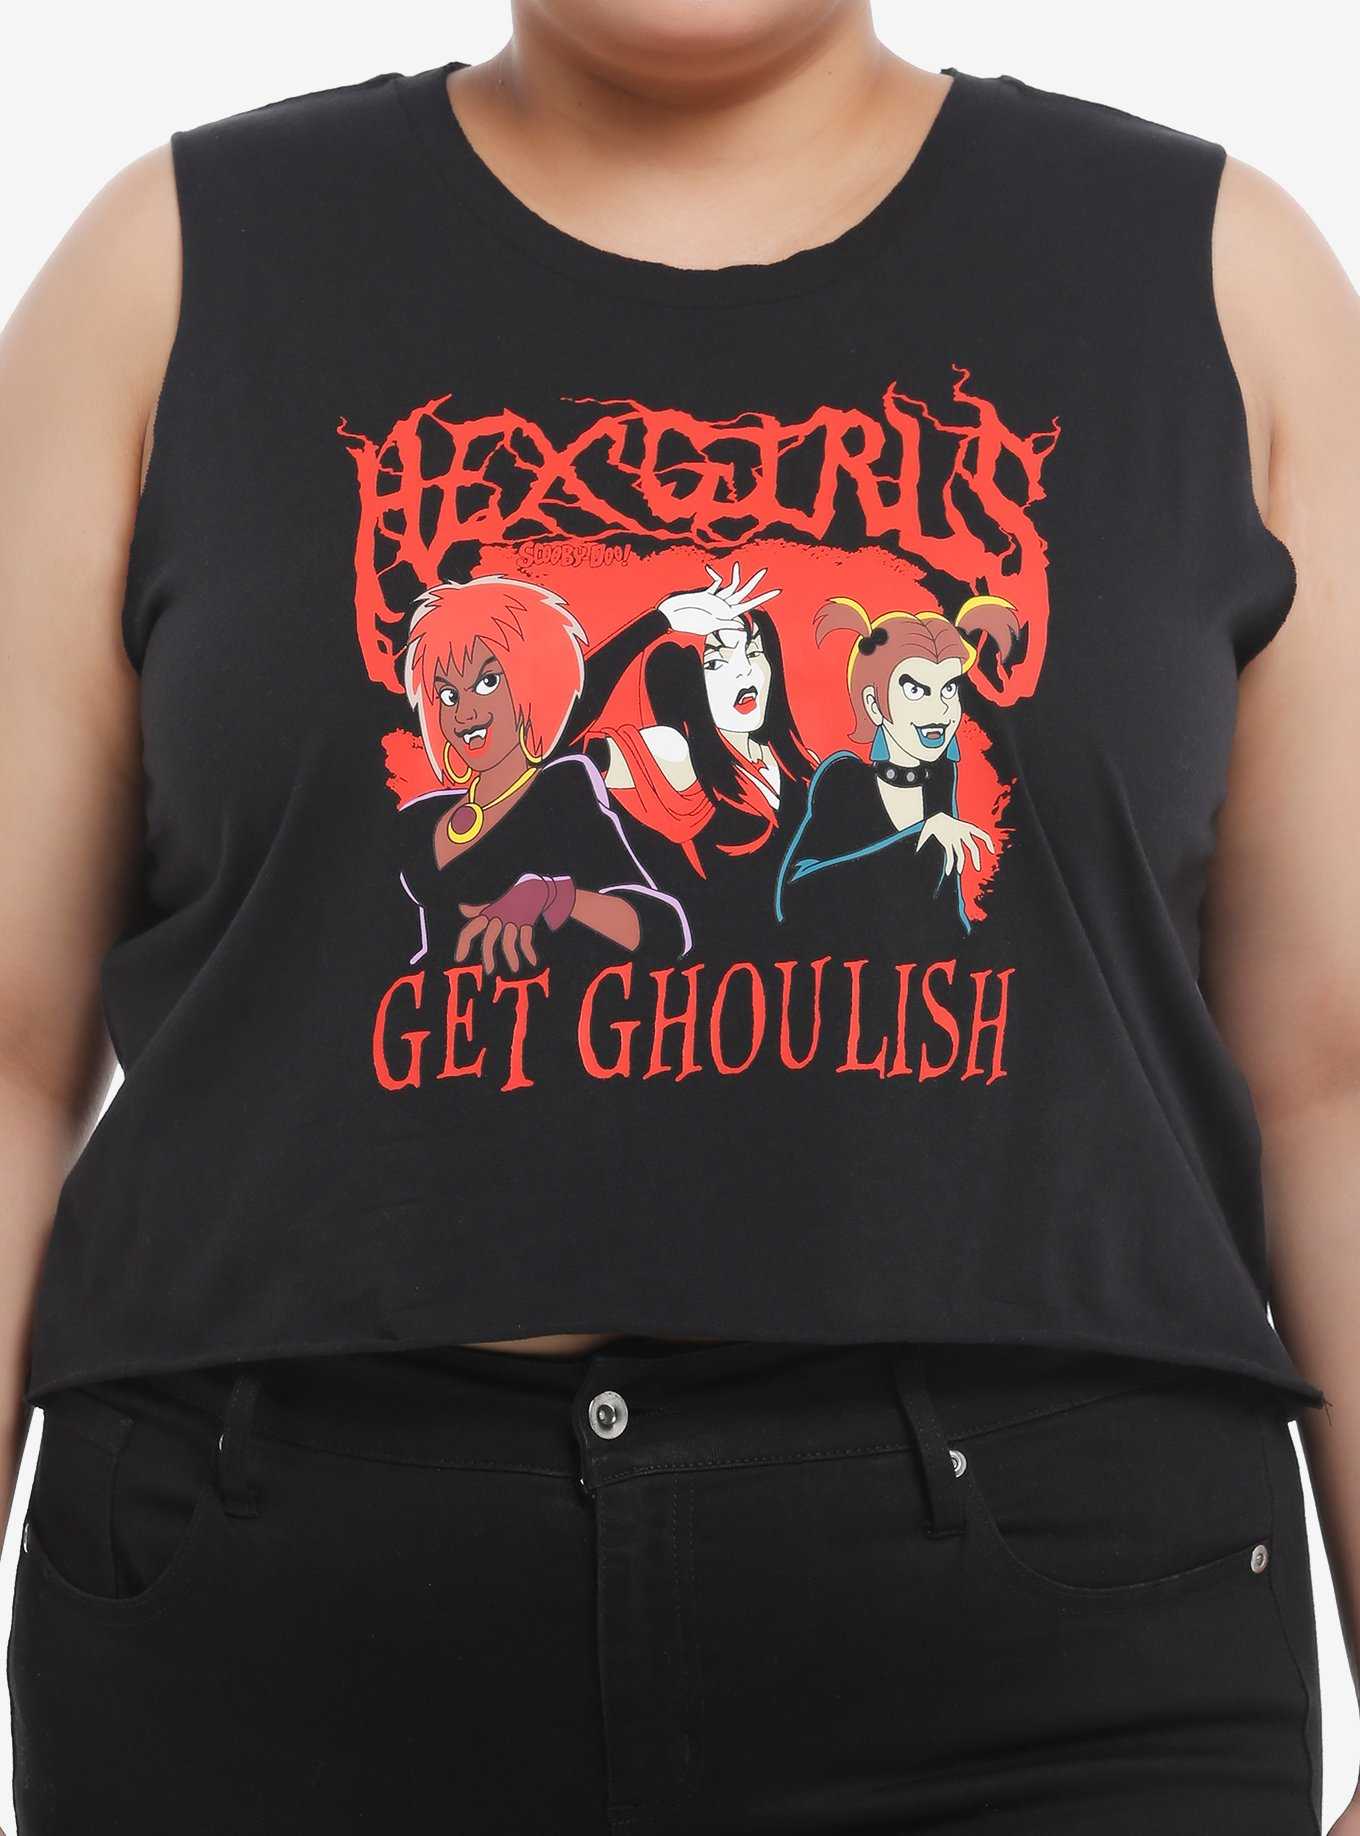 Scooby-Doo! The Hex Girls Crop Girls Muscle Tank Top Plus Size, , hi-res